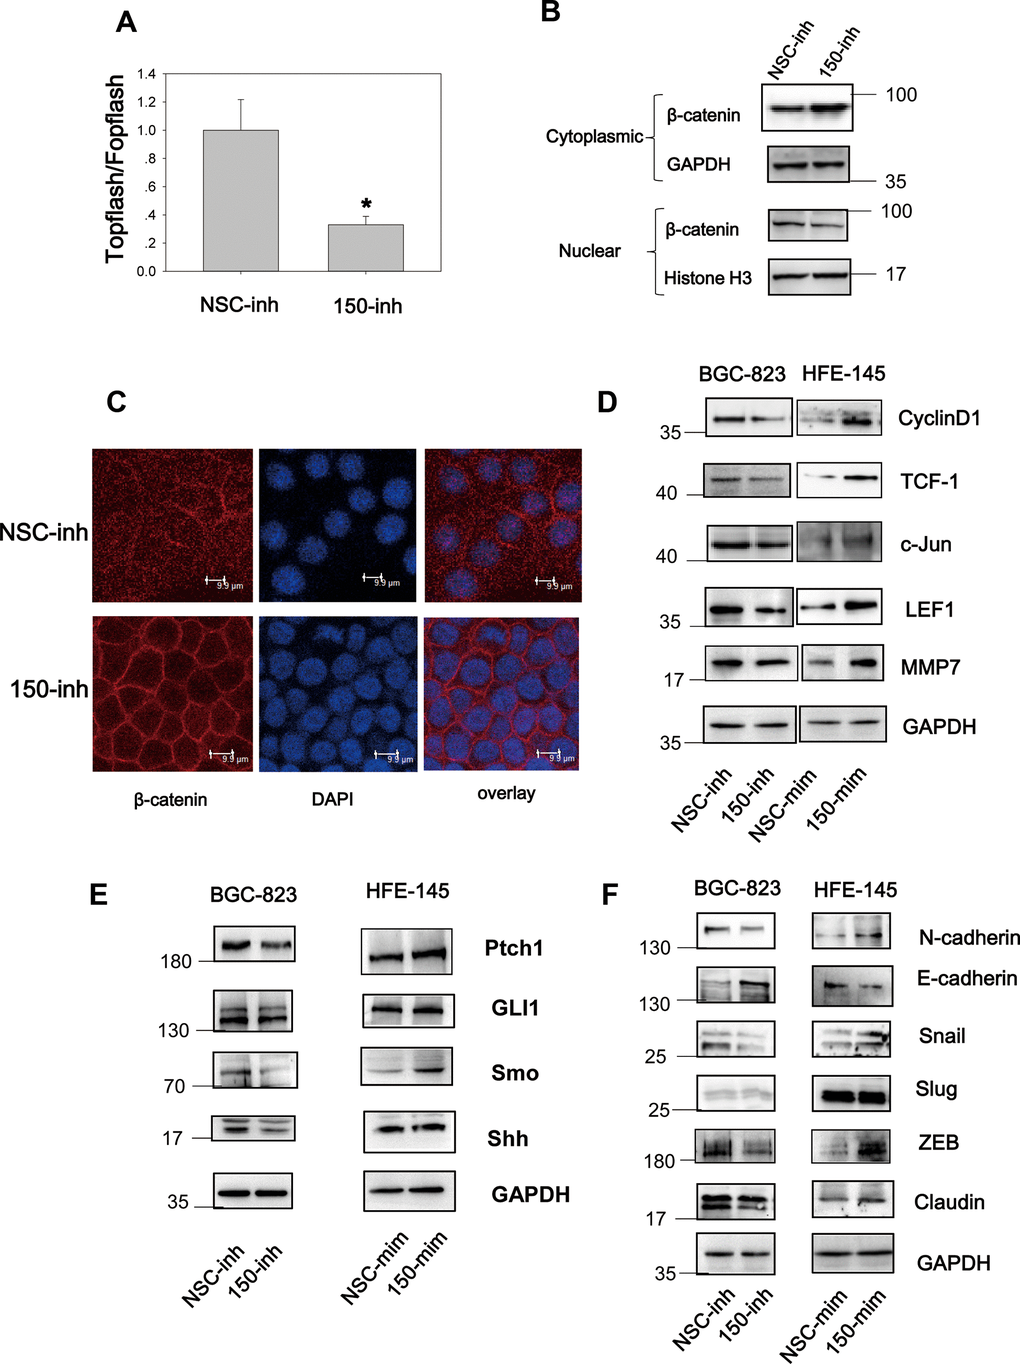 MiRNA-150 triggers the activation of the Wnt and Hh signaling pathways. (A) MiRNA-150 activated TOPFlash/FOPFlash luciferase activity. A TOPFlash/FOPFlash assay was conducted in BGC-823 cells transfected with miRNA-150 inhibitors. (B) The expression of β-catenin in the cytoplasm and nuclei of BGC-823 cells transfected with miRNA-150 inhibitors is shown. (C) Immunofluorescence analysis of the localization of β-catenin in BGC-823 cells transfected with miRNA-150 inhibitors is shown. (D, E) MiRNA-150 activated Wnt and Hh target gene expression. The expression of Wnt and Hh downstream target genes in BGC-823 and HFE-145 cells was detected by western blotting. (F) MiRNA-150 induced EMT. The expression of EMT markers in BGC-823 cells or HFE-145 cells was measured by western blotting.